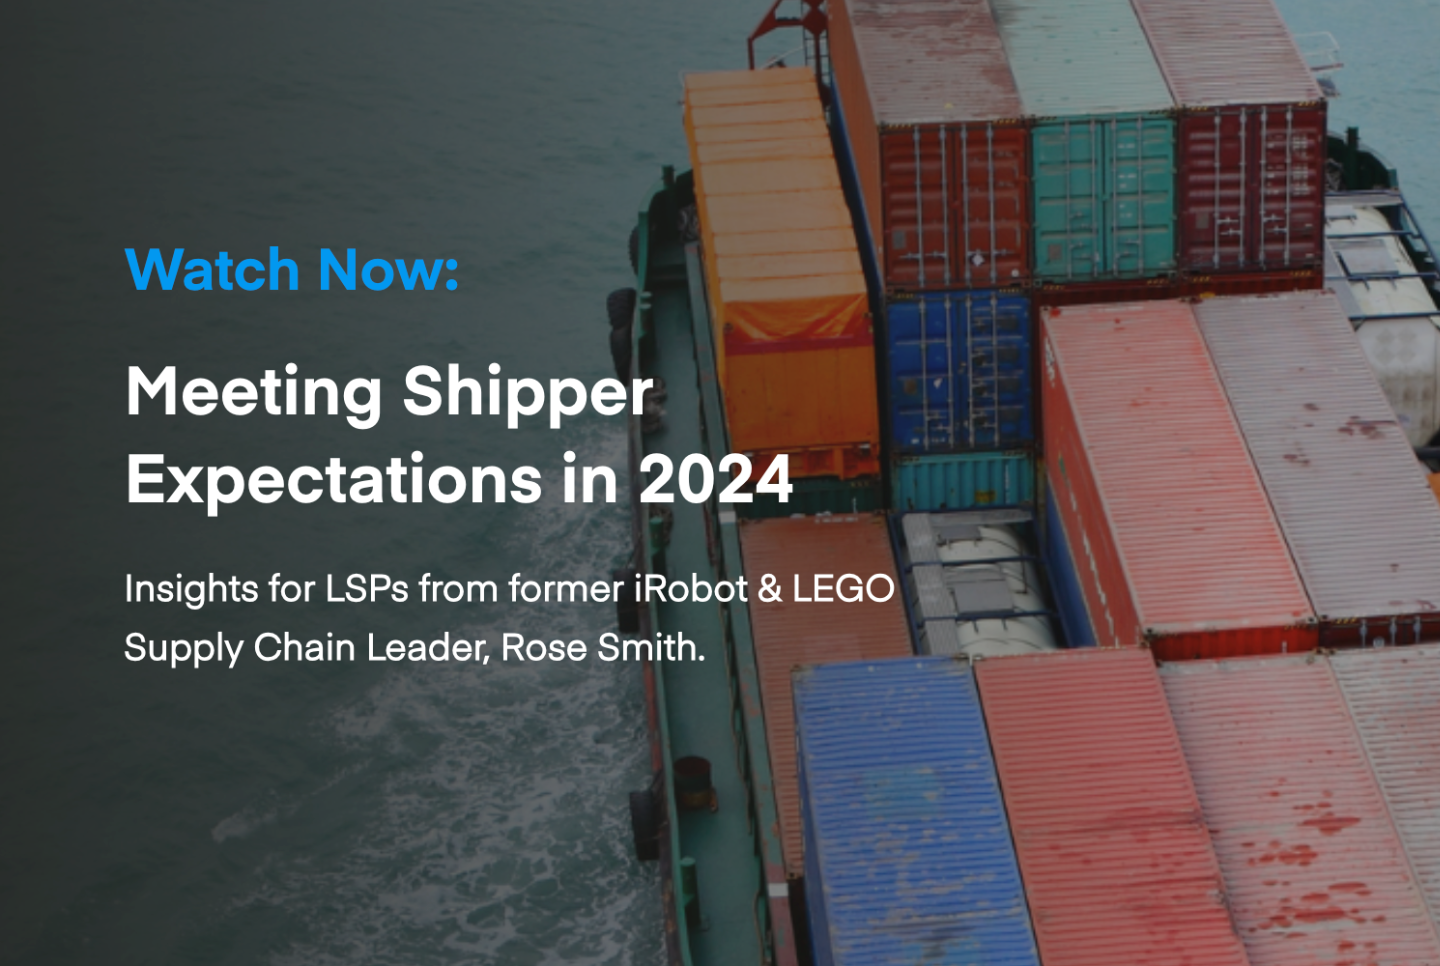 Meeting shipper expectations in 2024